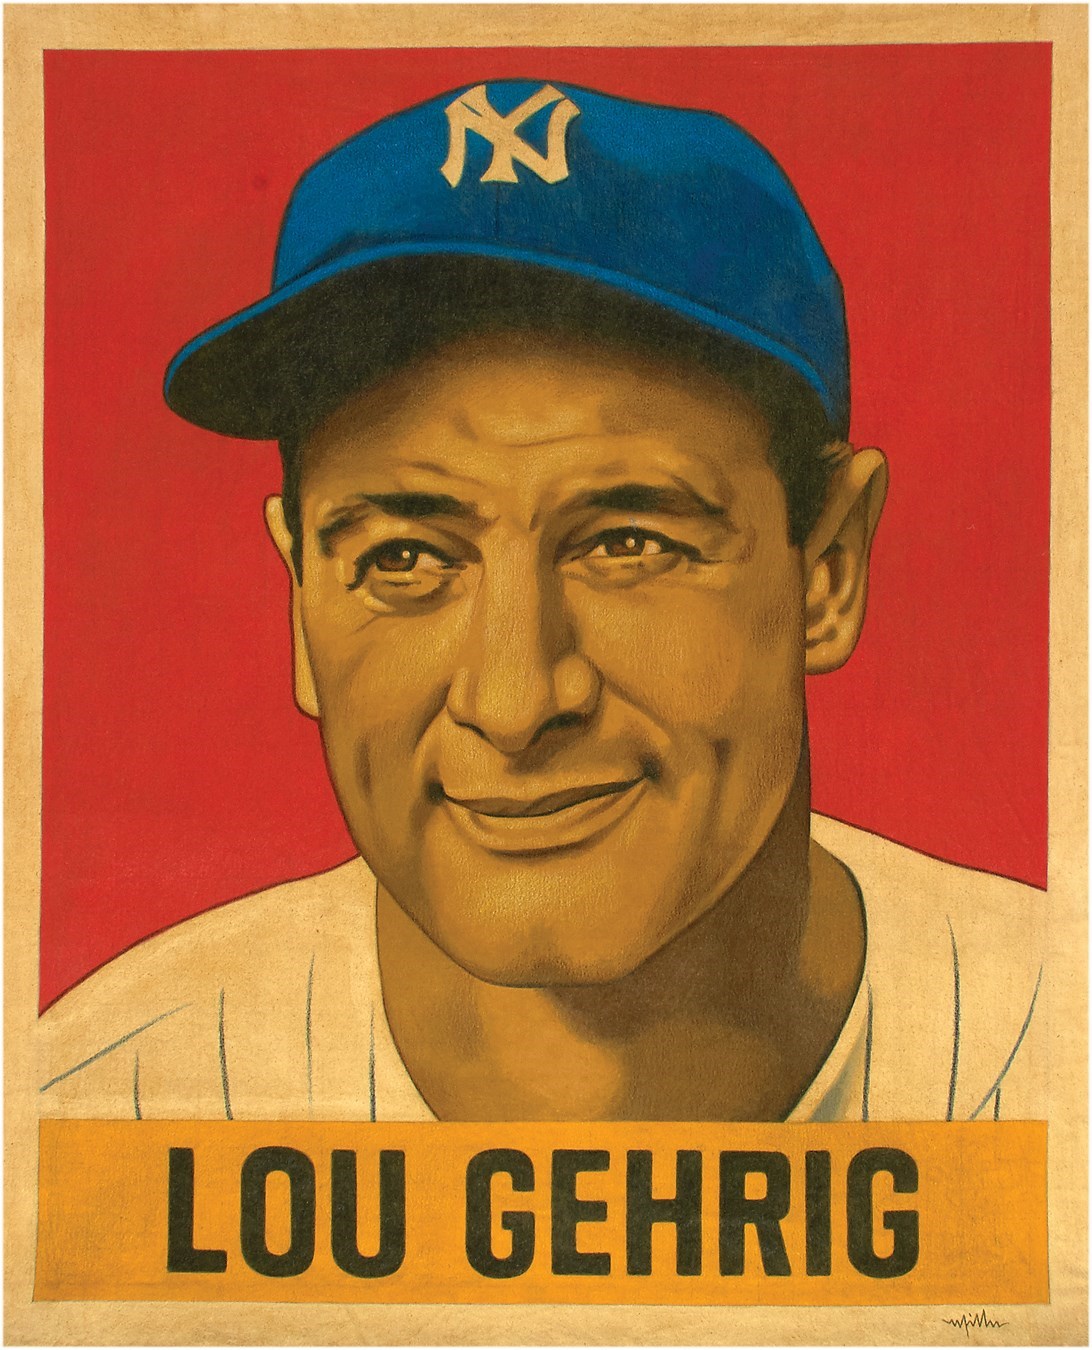 - “A Card That Never Was: LOU GEHRIG (1948 Leaf)